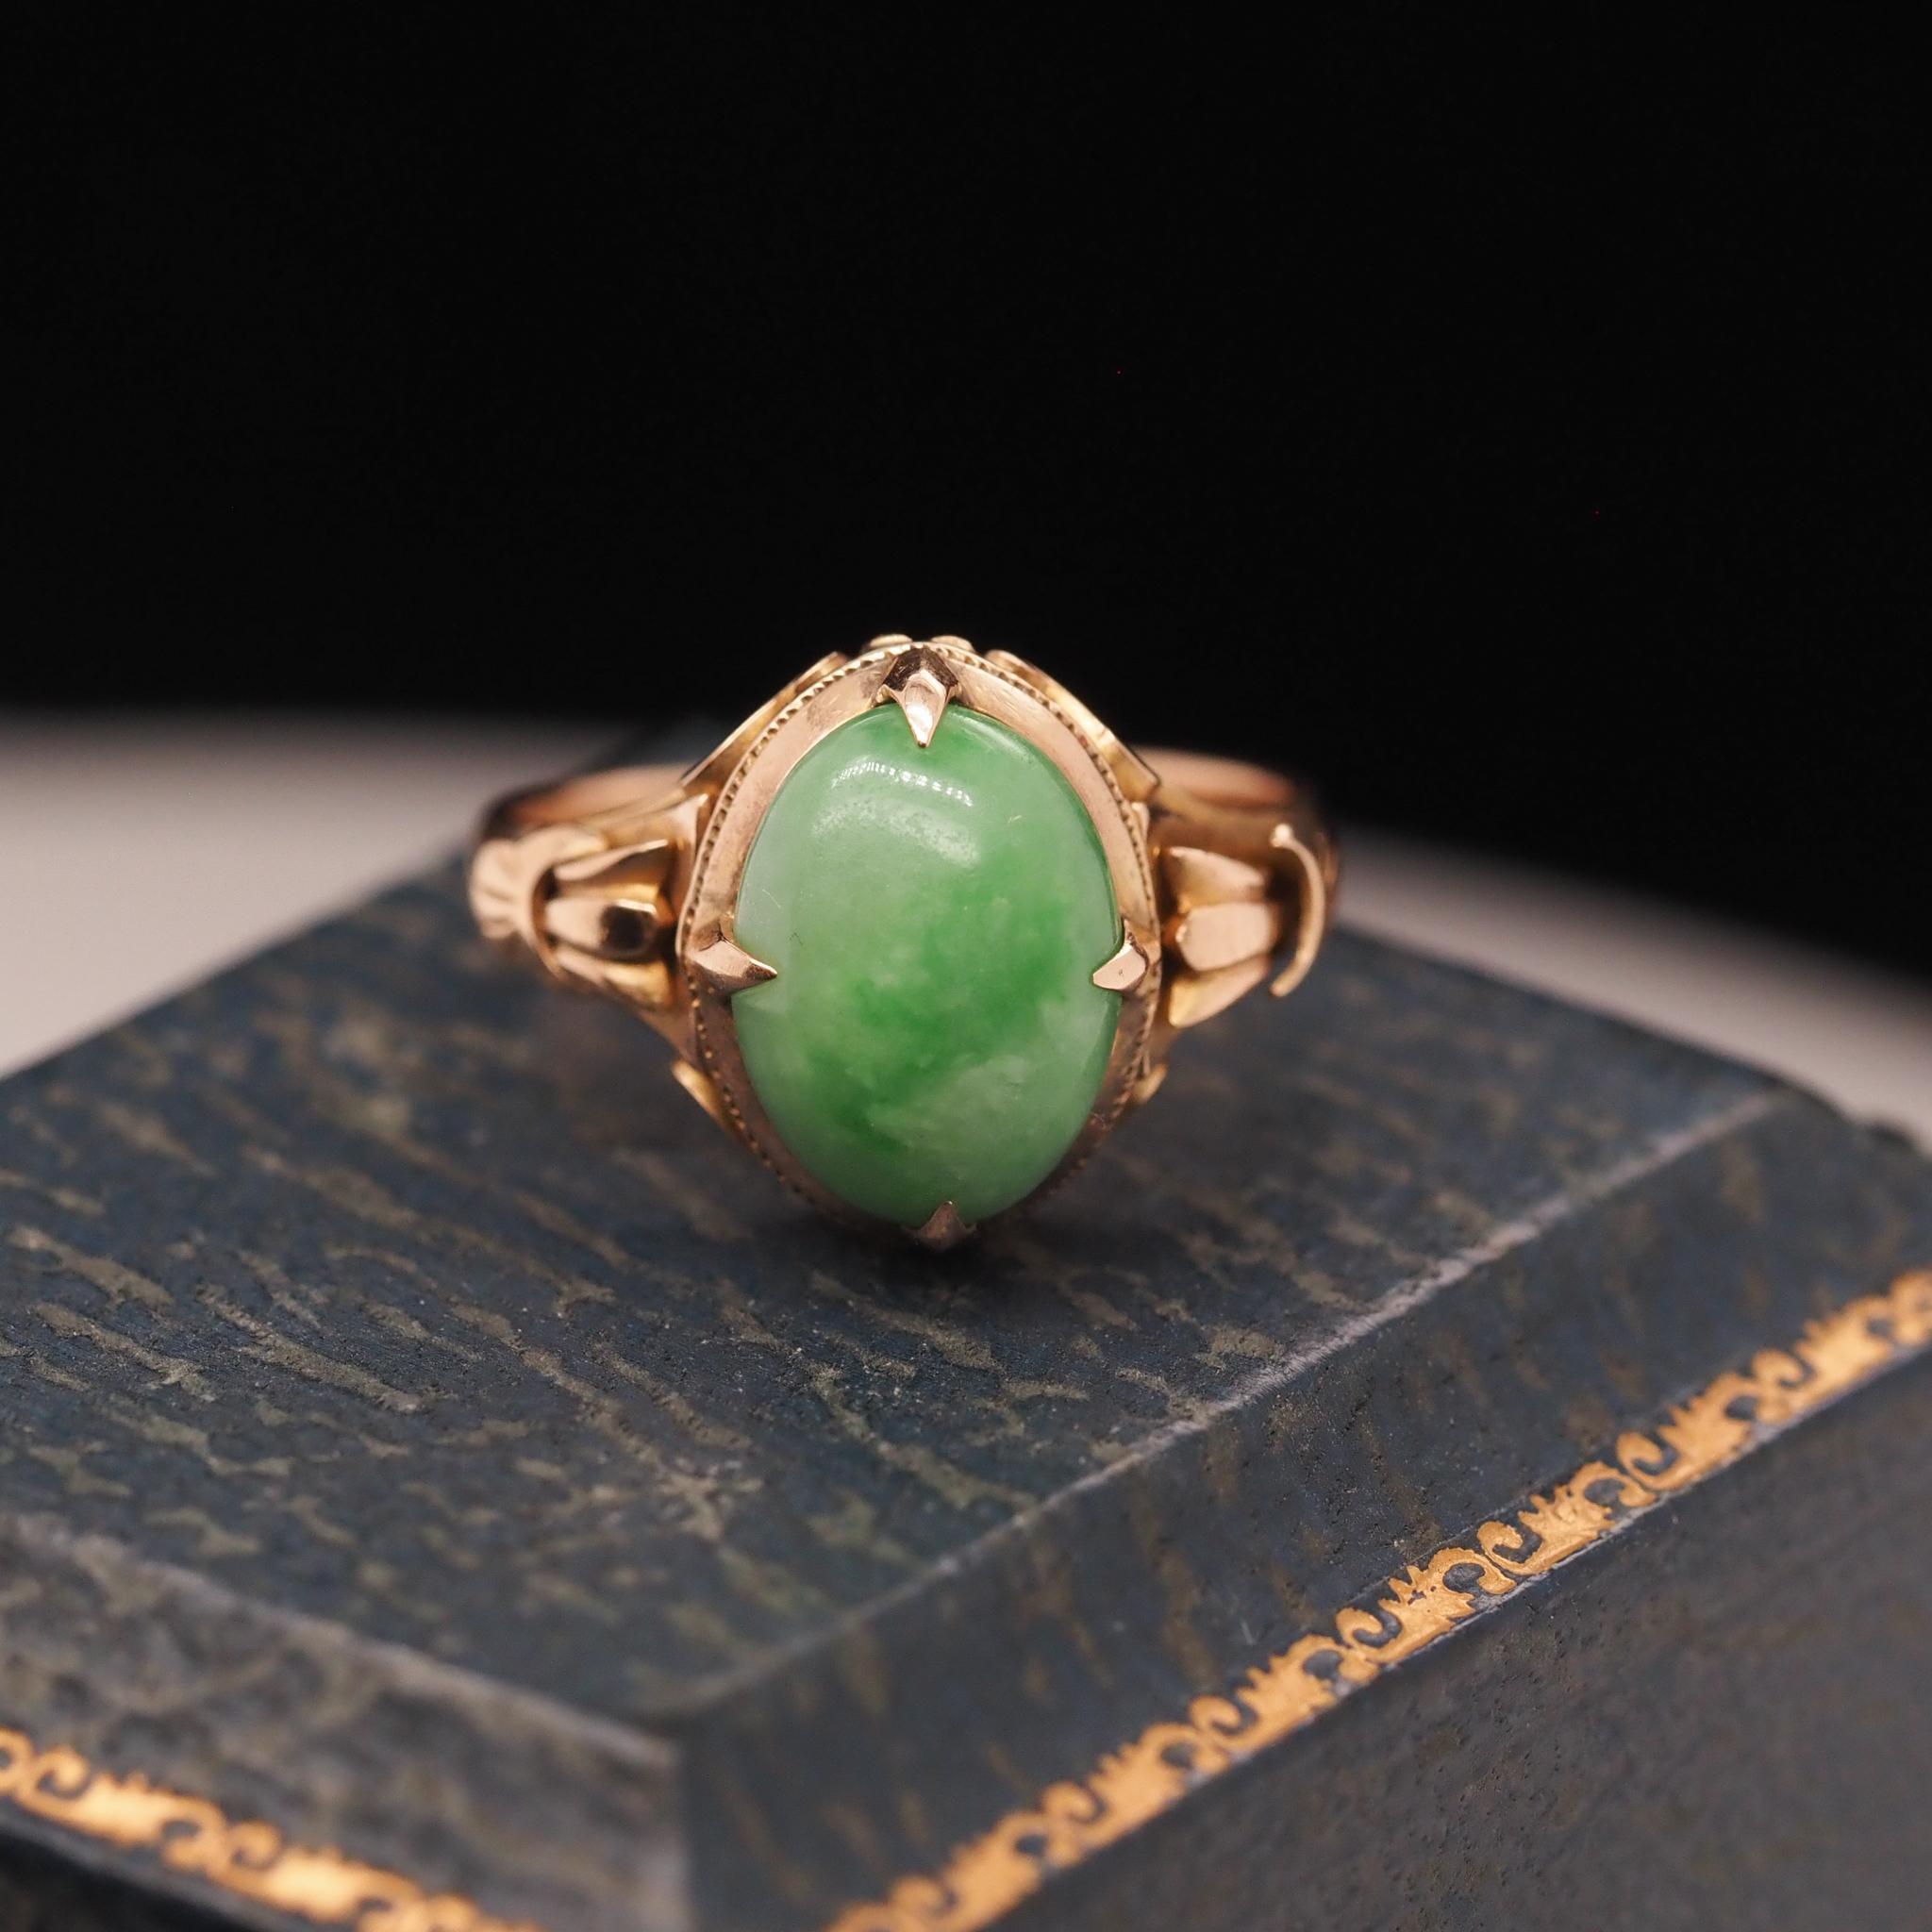 Year: 1940s
Item Details:
Ring Size: 7.5 (Sizable)
Metal Type: 18k Yellow Gold [Hallmarked, and Tested]
Weight: 4.3 grams
Jade Details: 12.5mm x 8.5mm
Band Width: 2.5mm
Condition: Excellent
Era: Vintage